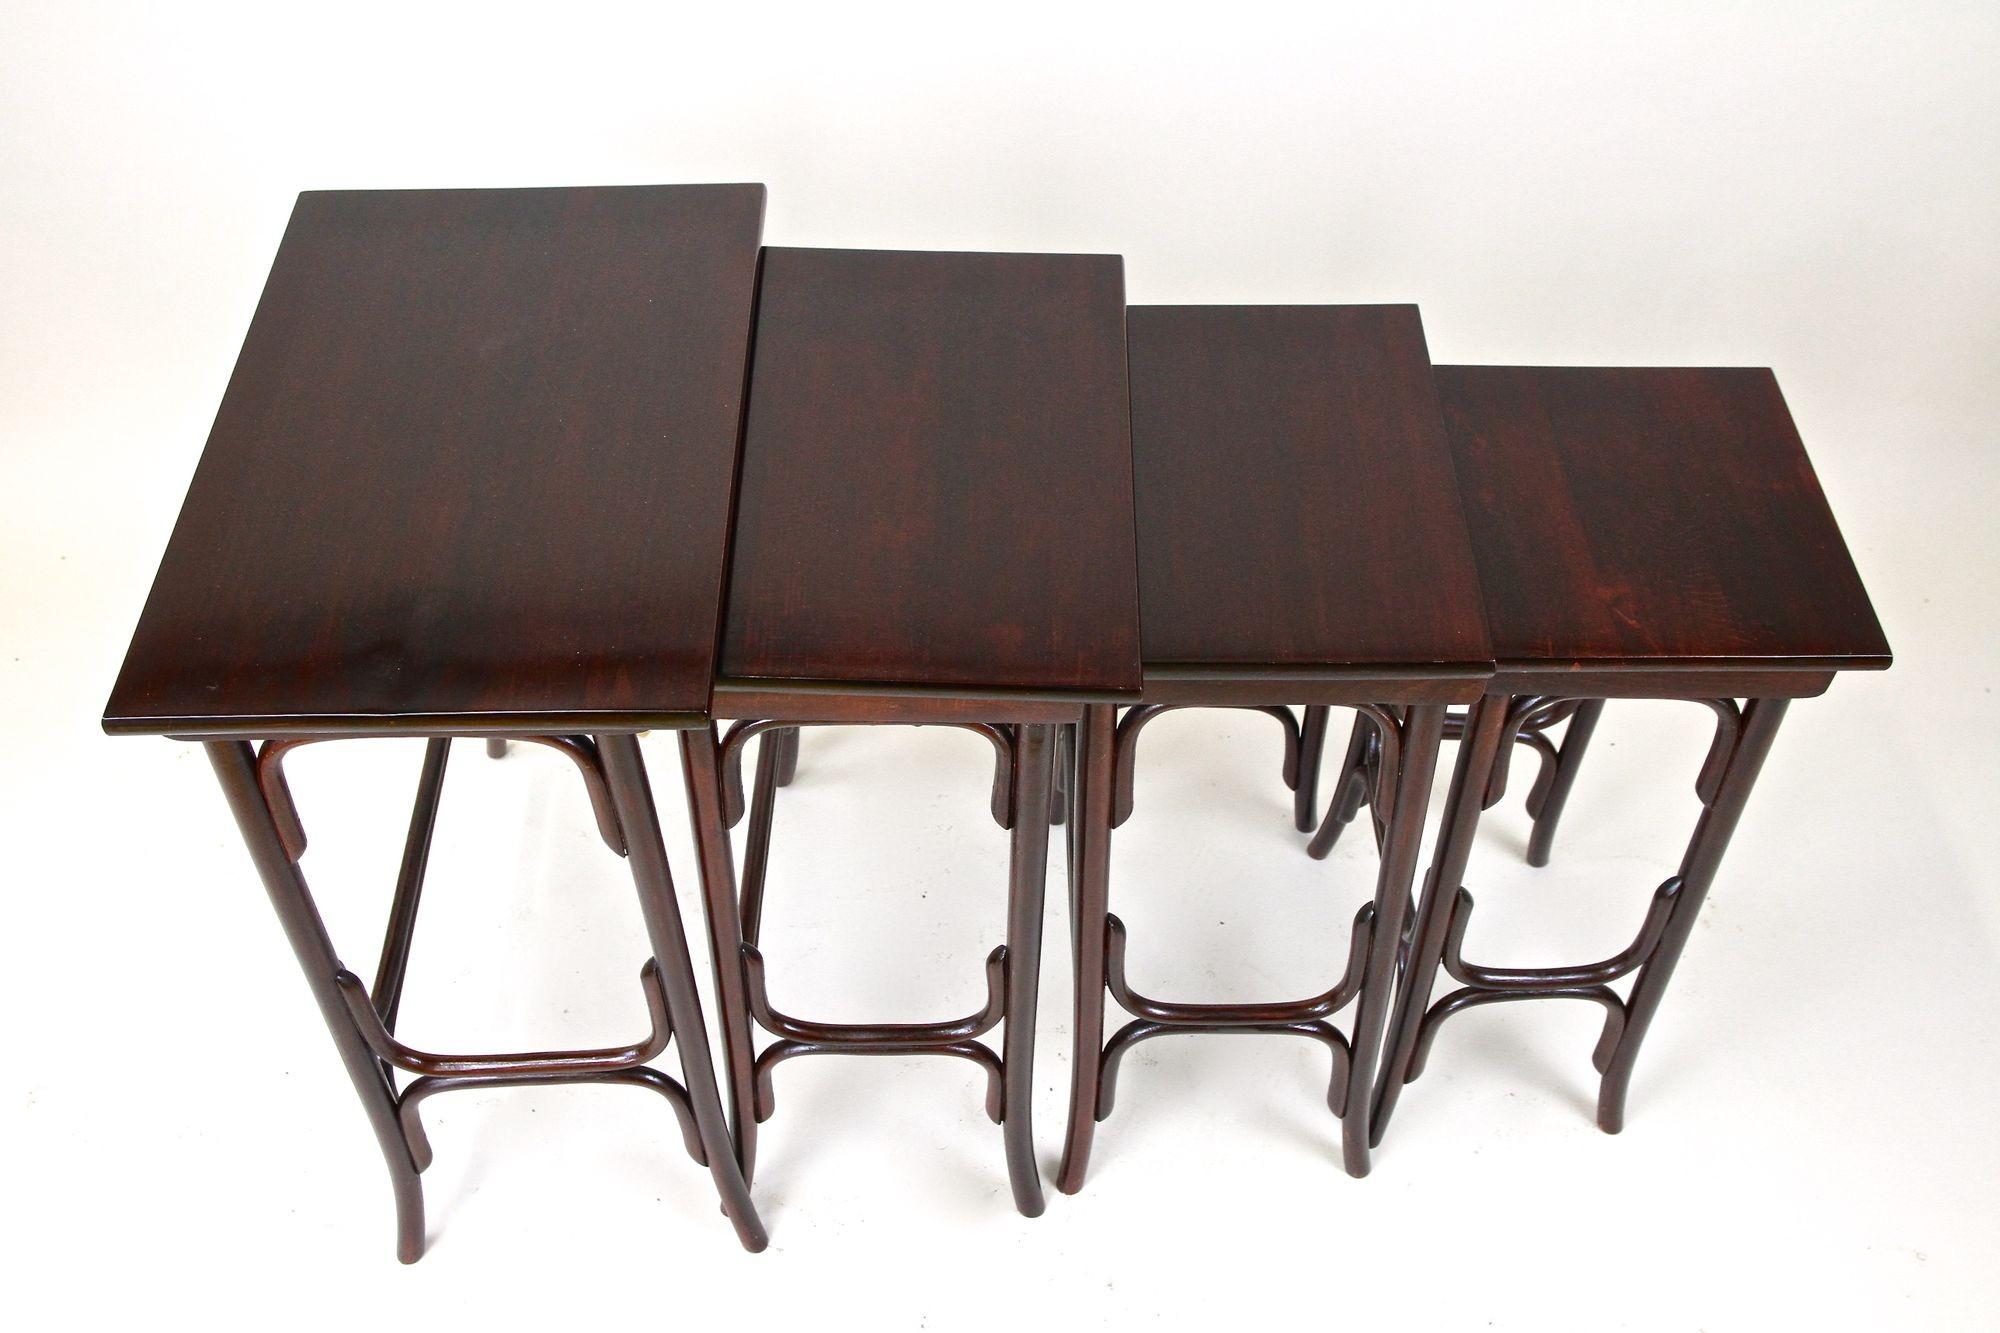 Polished Art Nouveau Bentwood Nesting Tables by Thonet, Marked, Austria circa 1905 For Sale